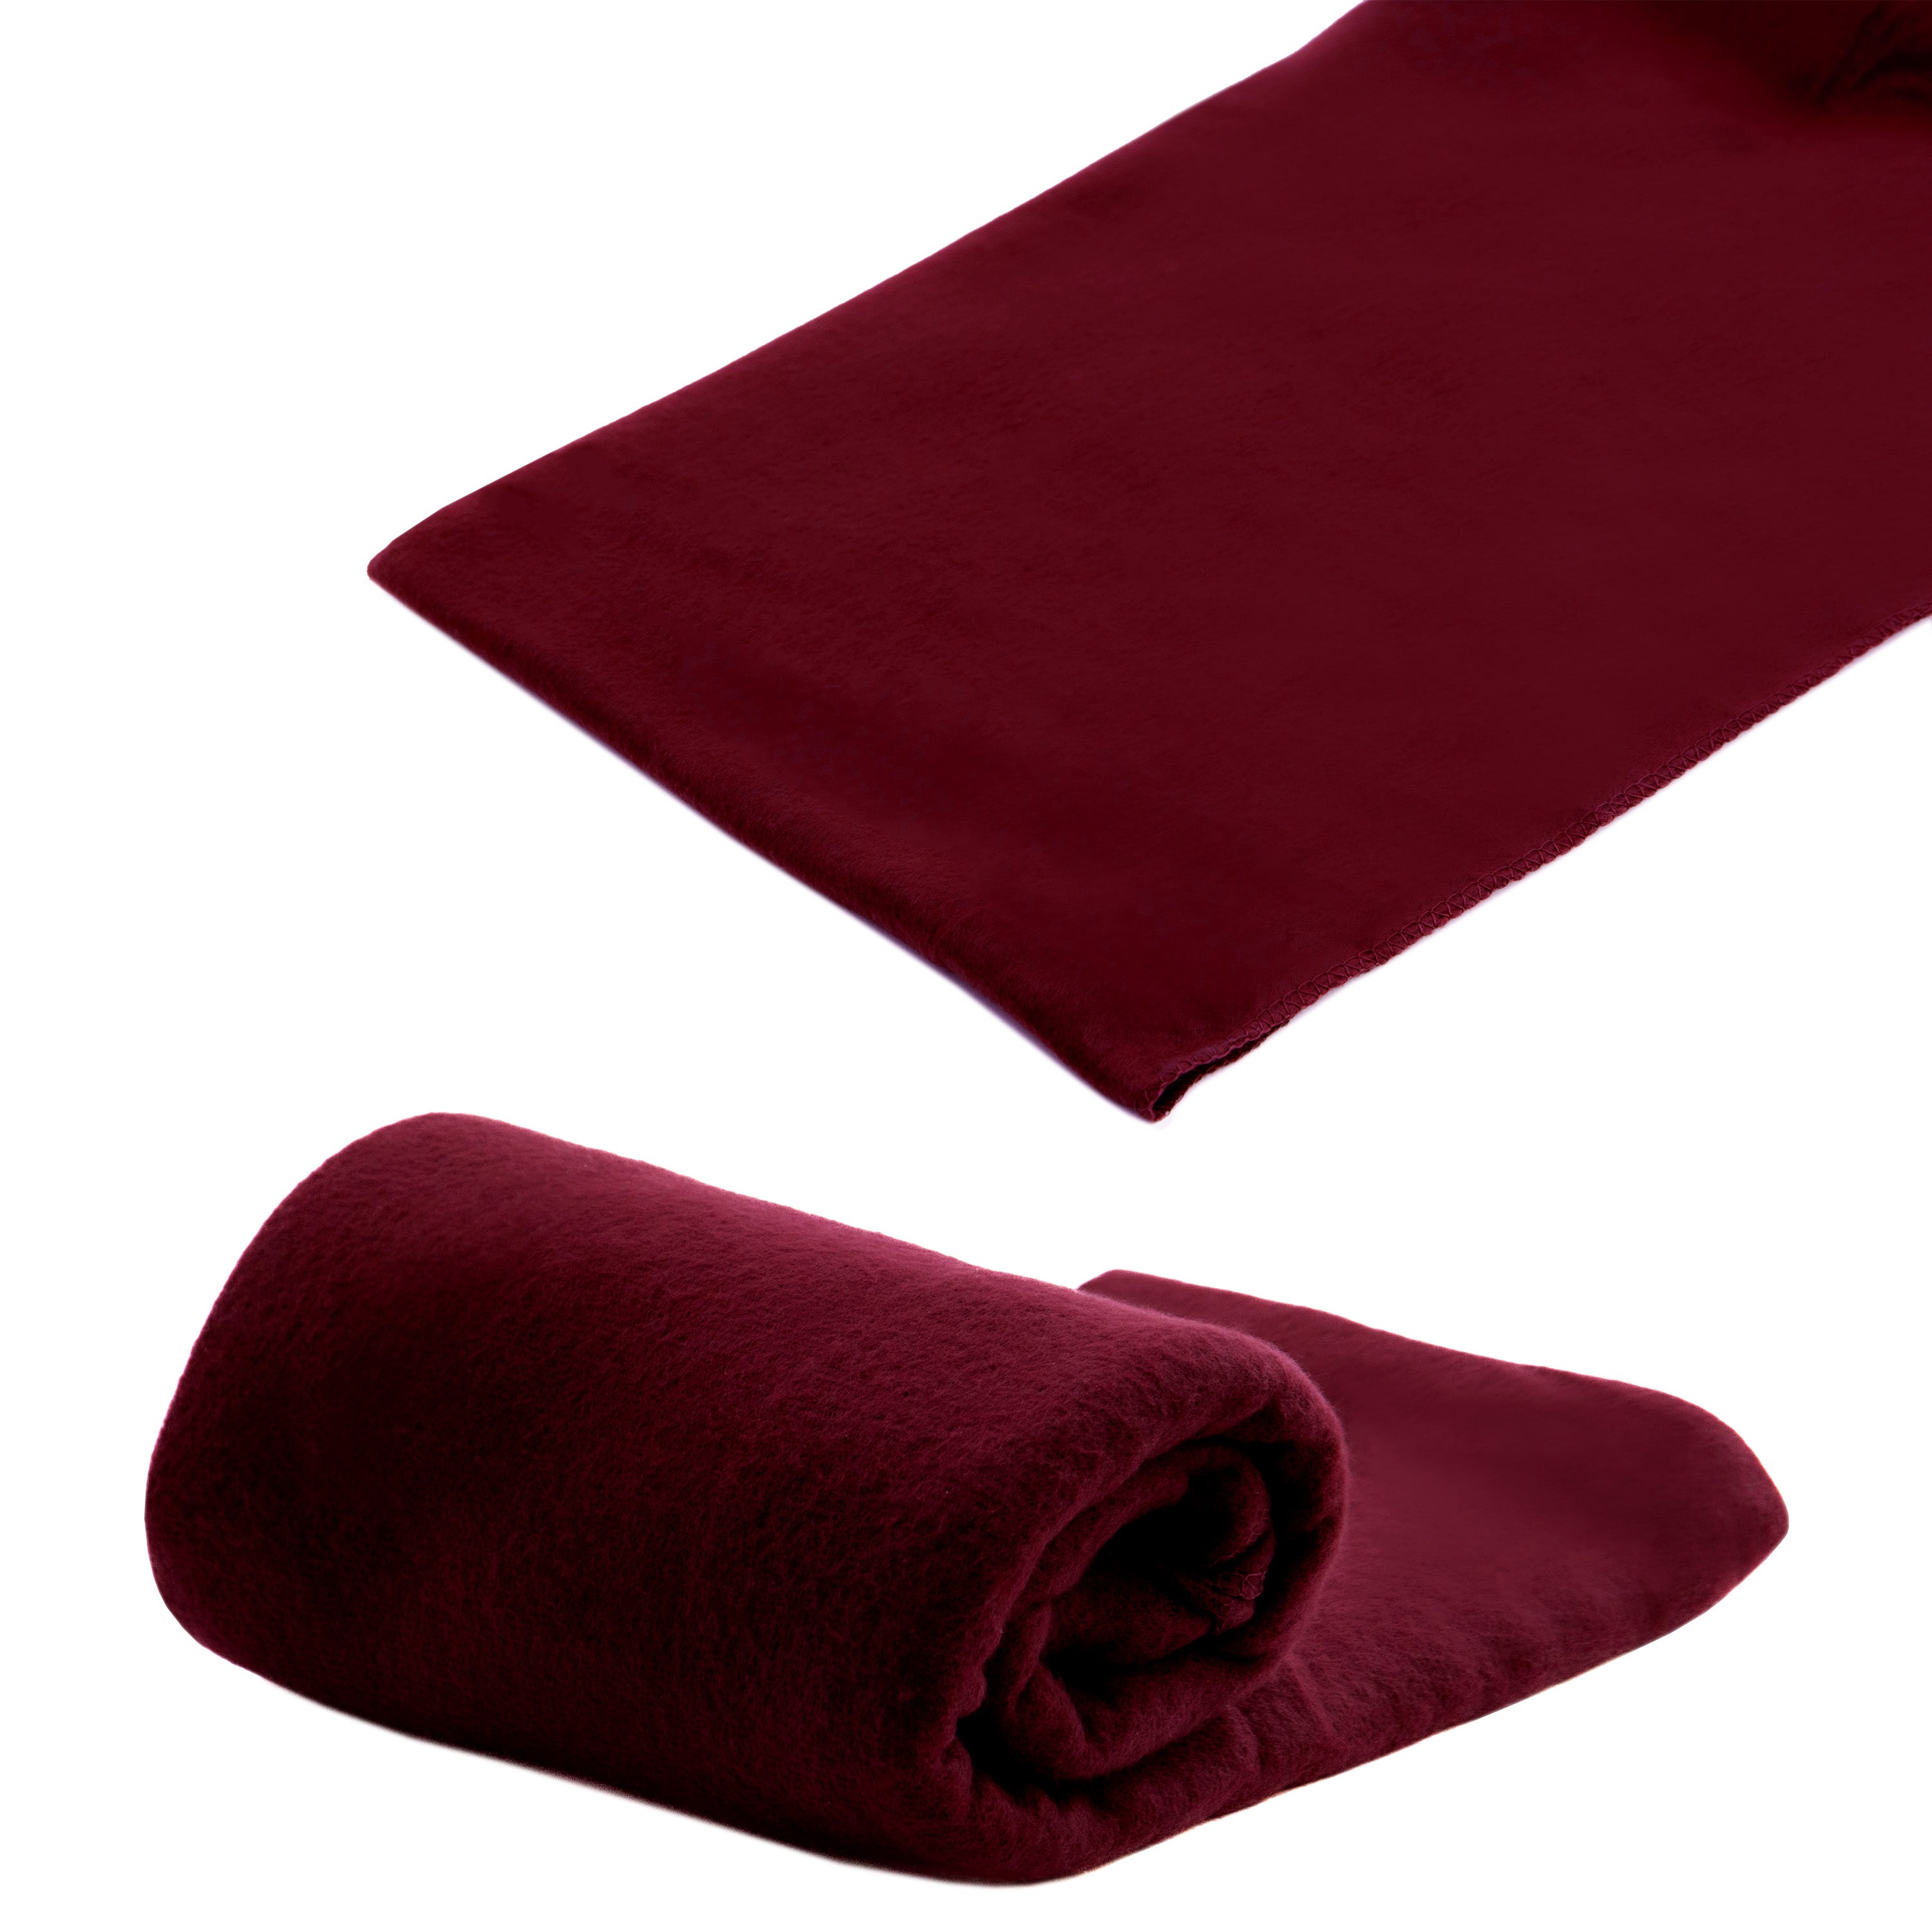 Super Thin Wholesale Throw Blankets in 3 Assorted Colors - Bulk Case of 24